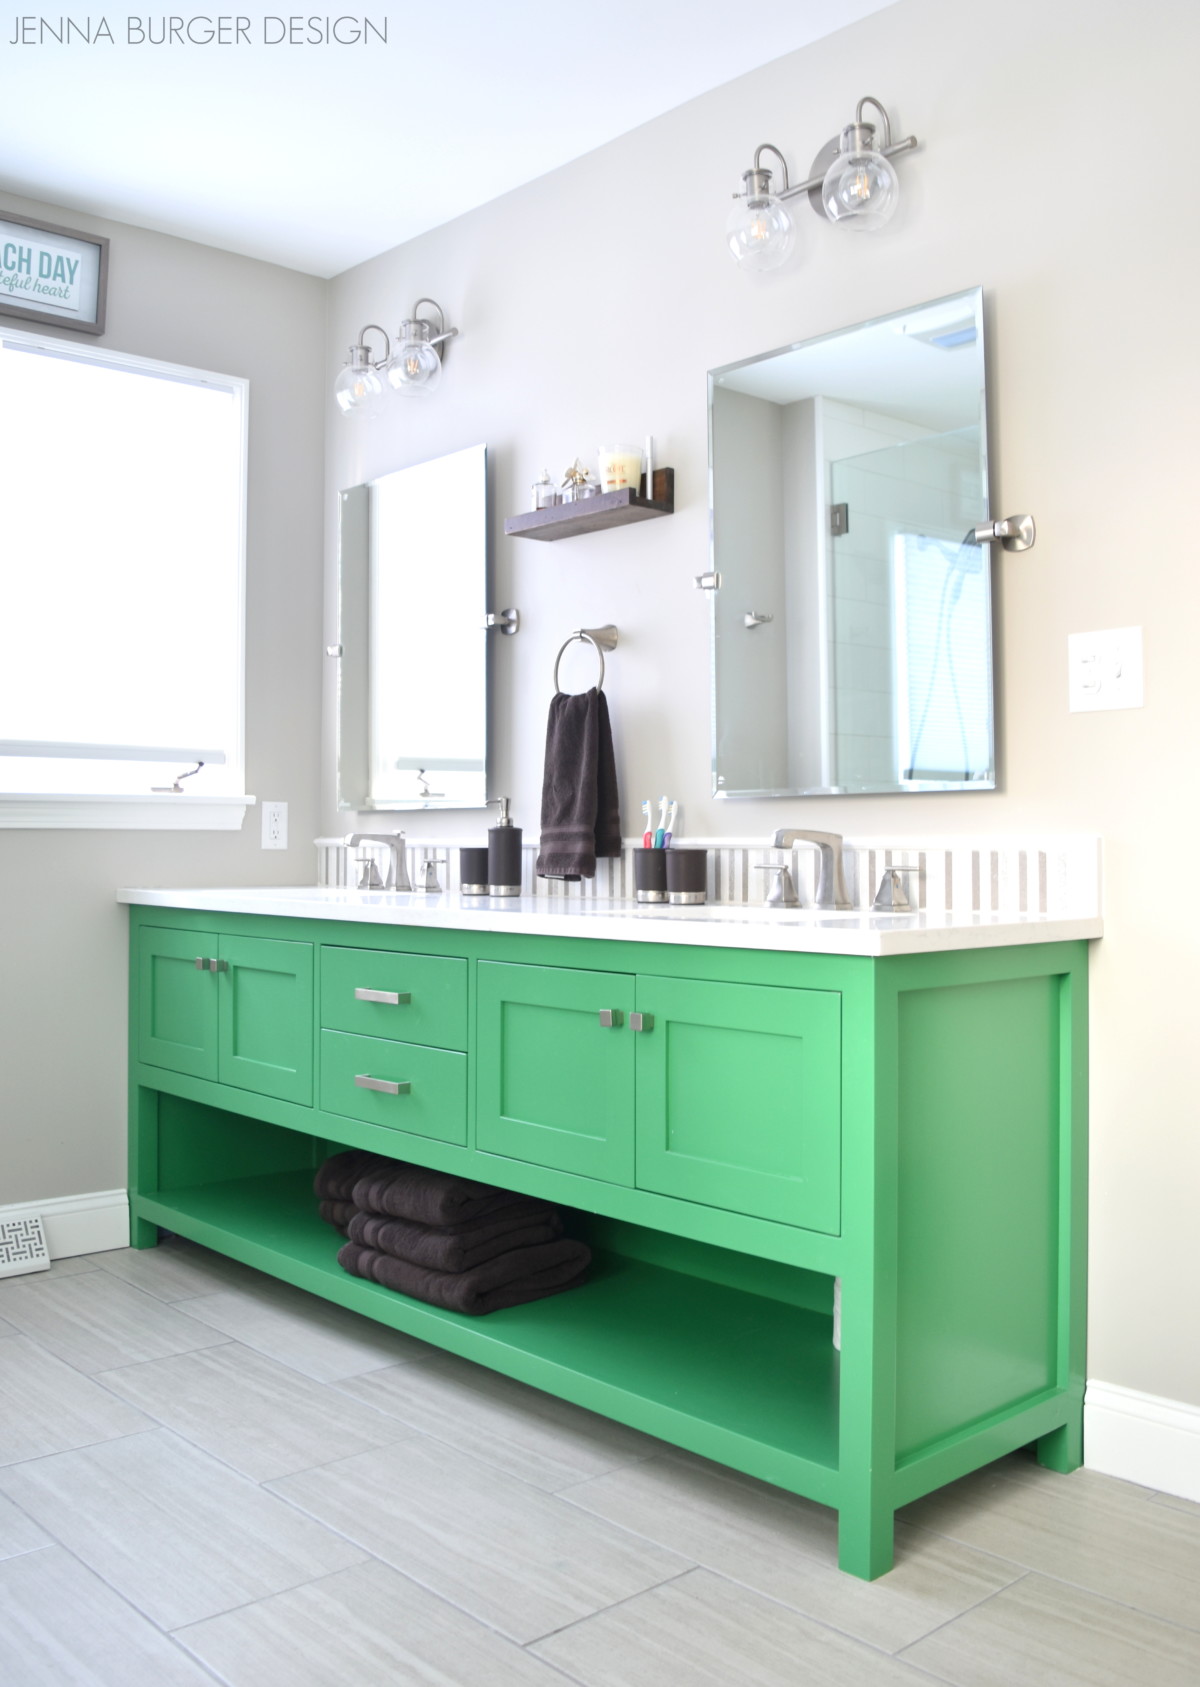 Bathroom Green With Envy Jenna Burger Design Llc,How To Design An Office Space